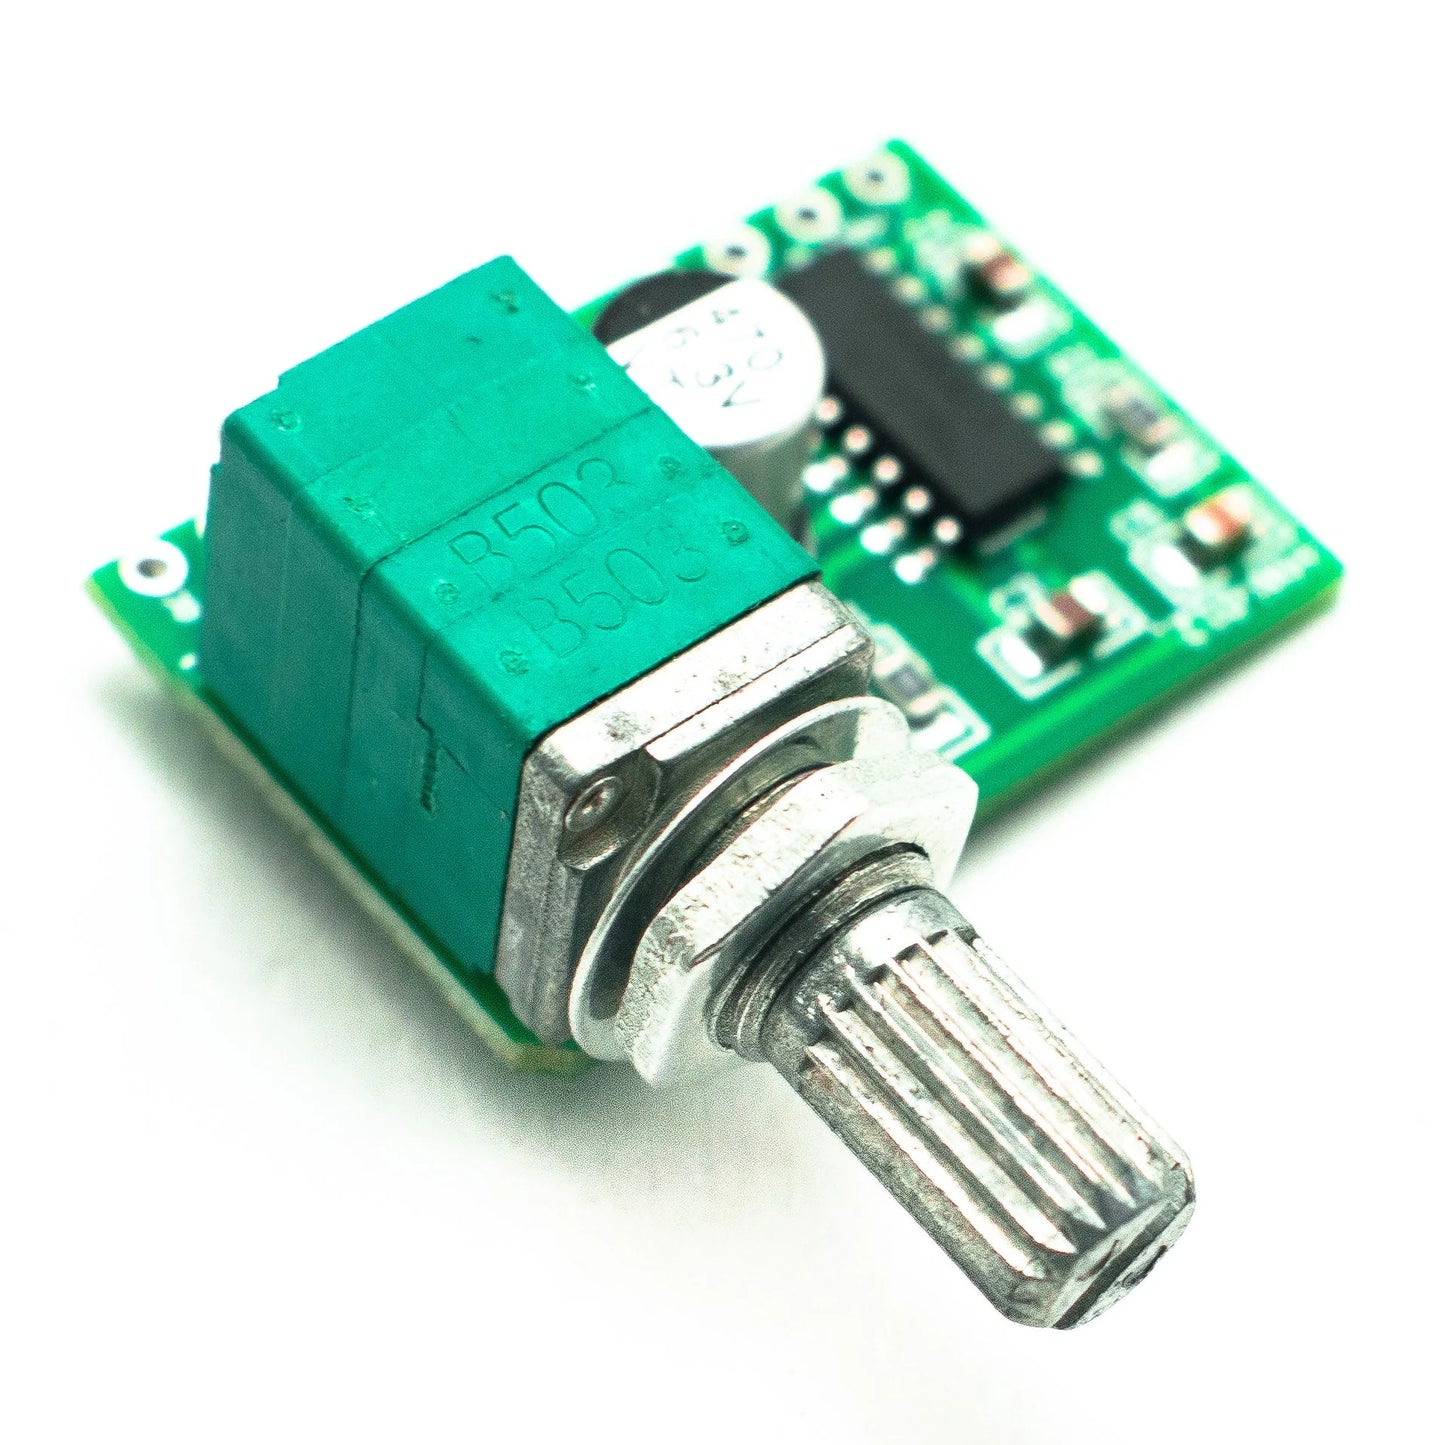 PAM8403 with Output Controlling Potentiometer